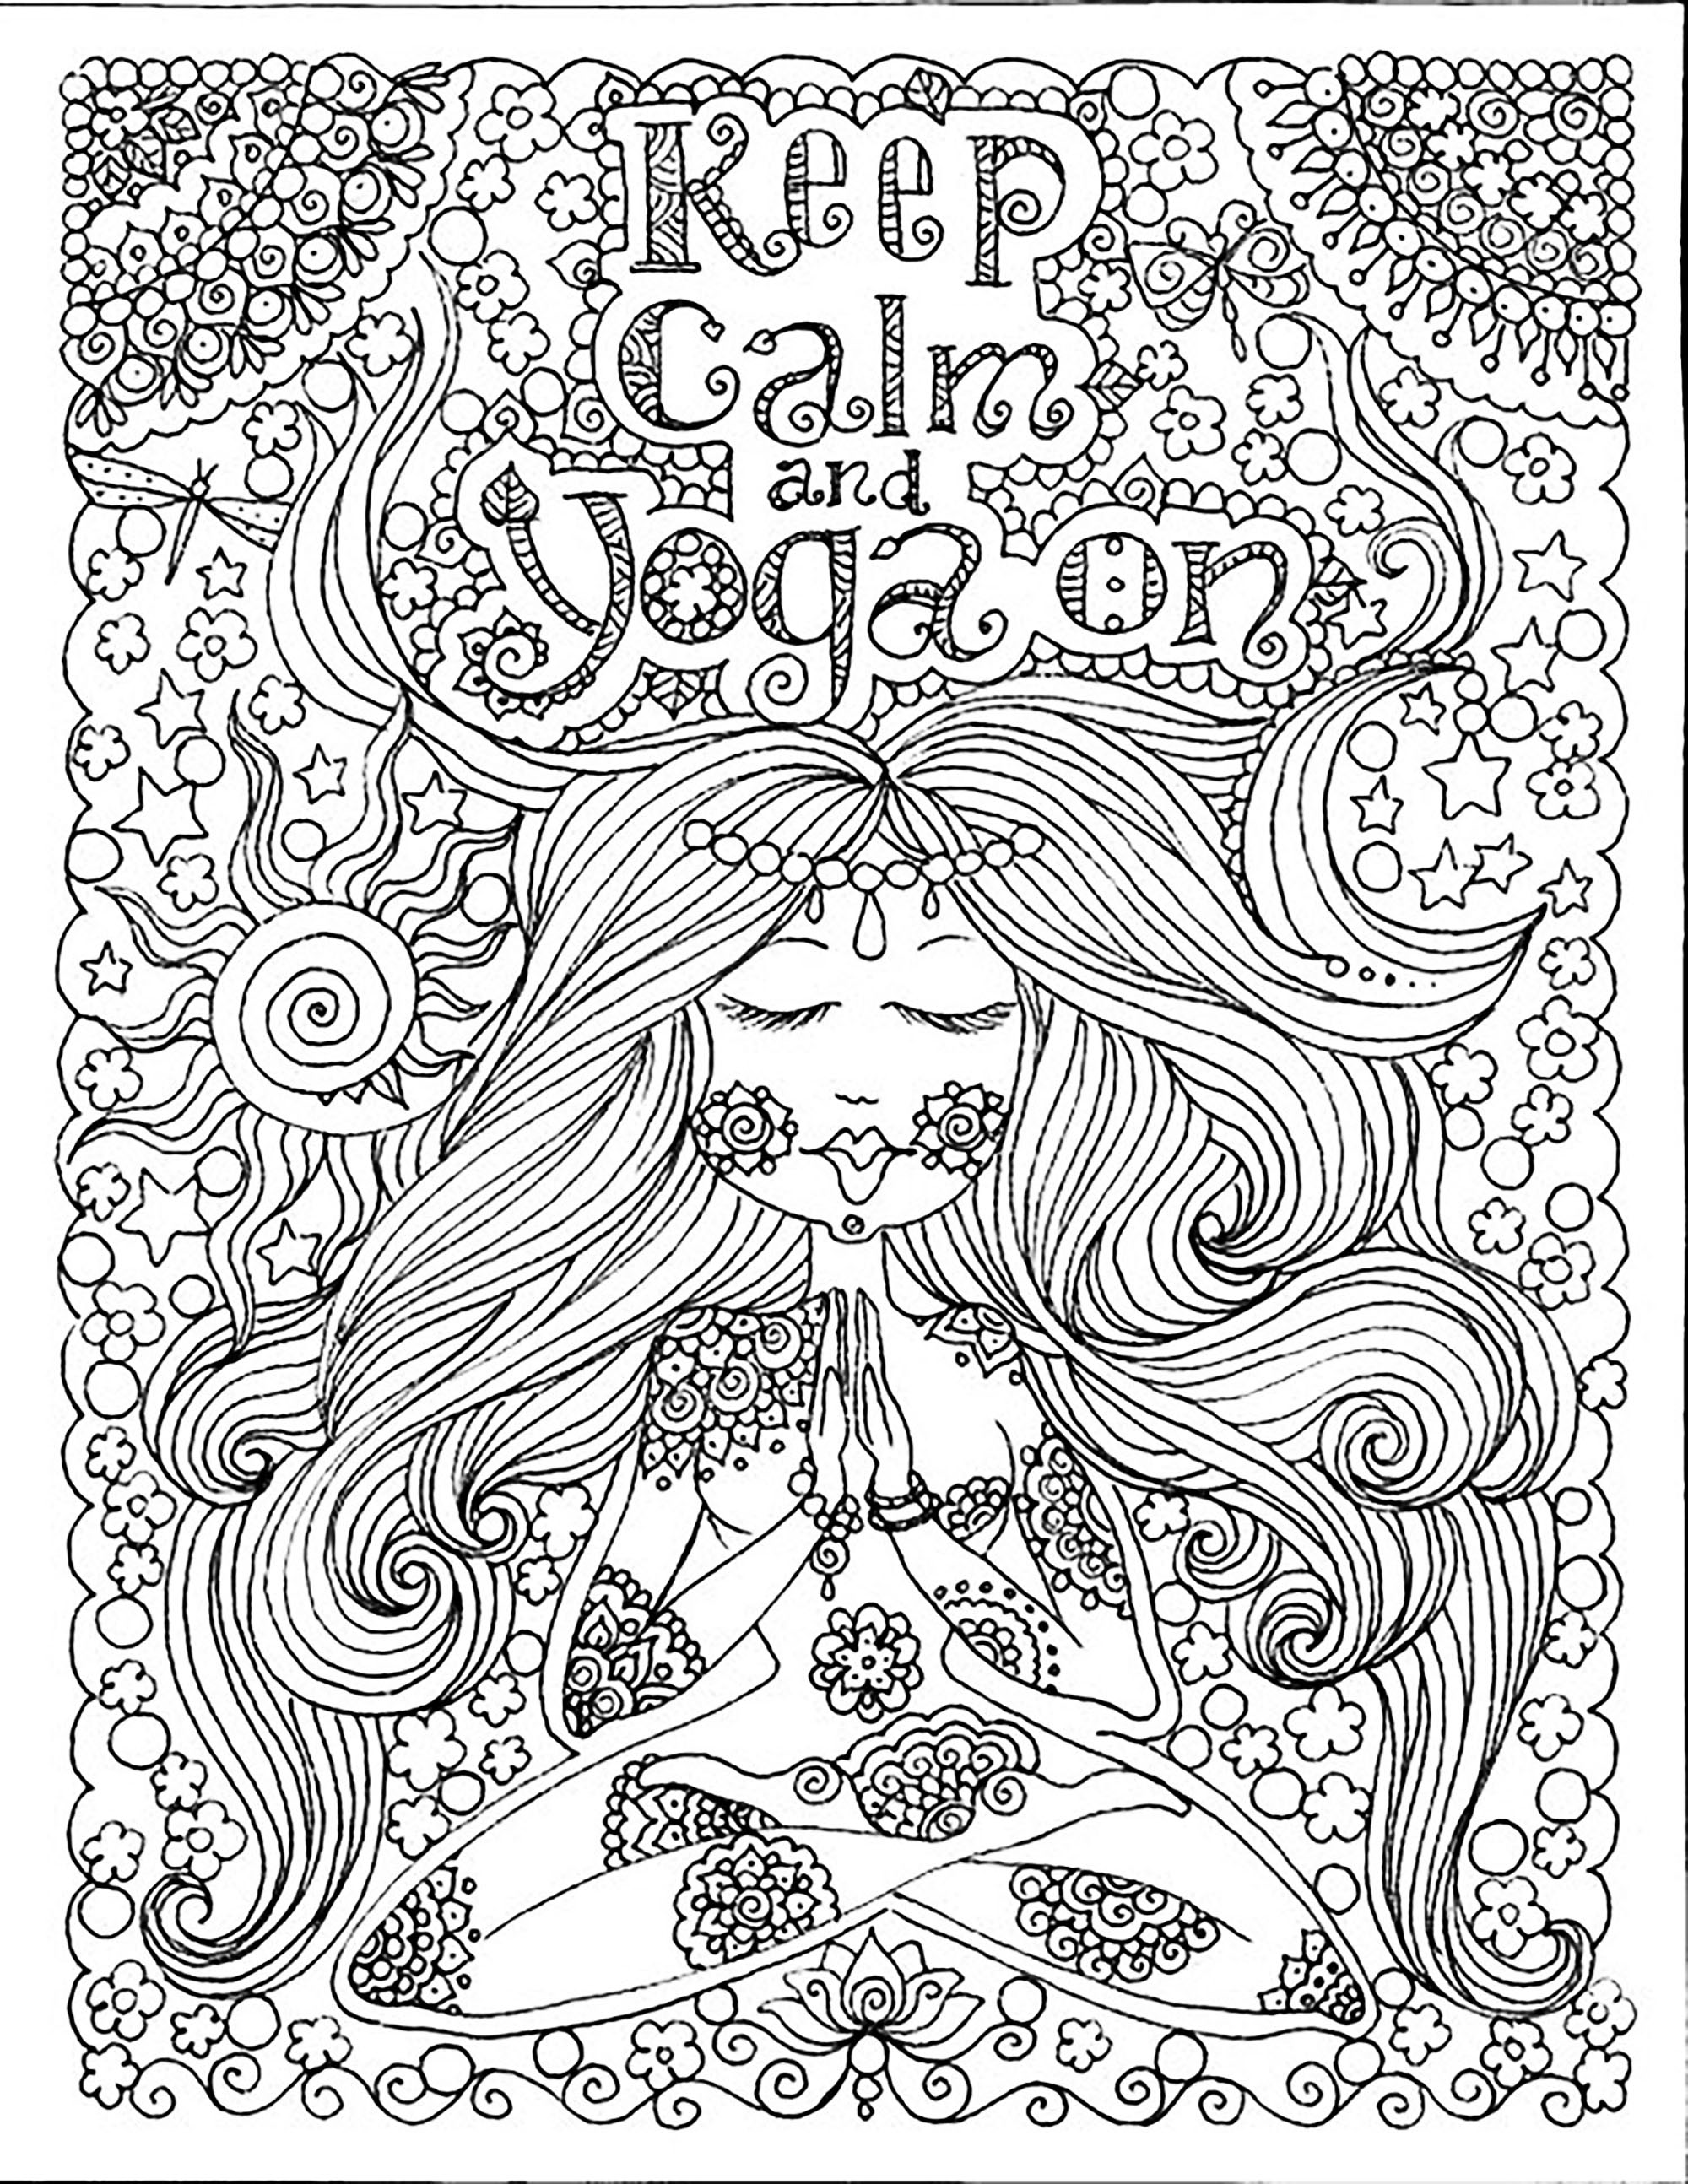 coloring-page-keep-calm-and-do-yoga-by-deborah-muller